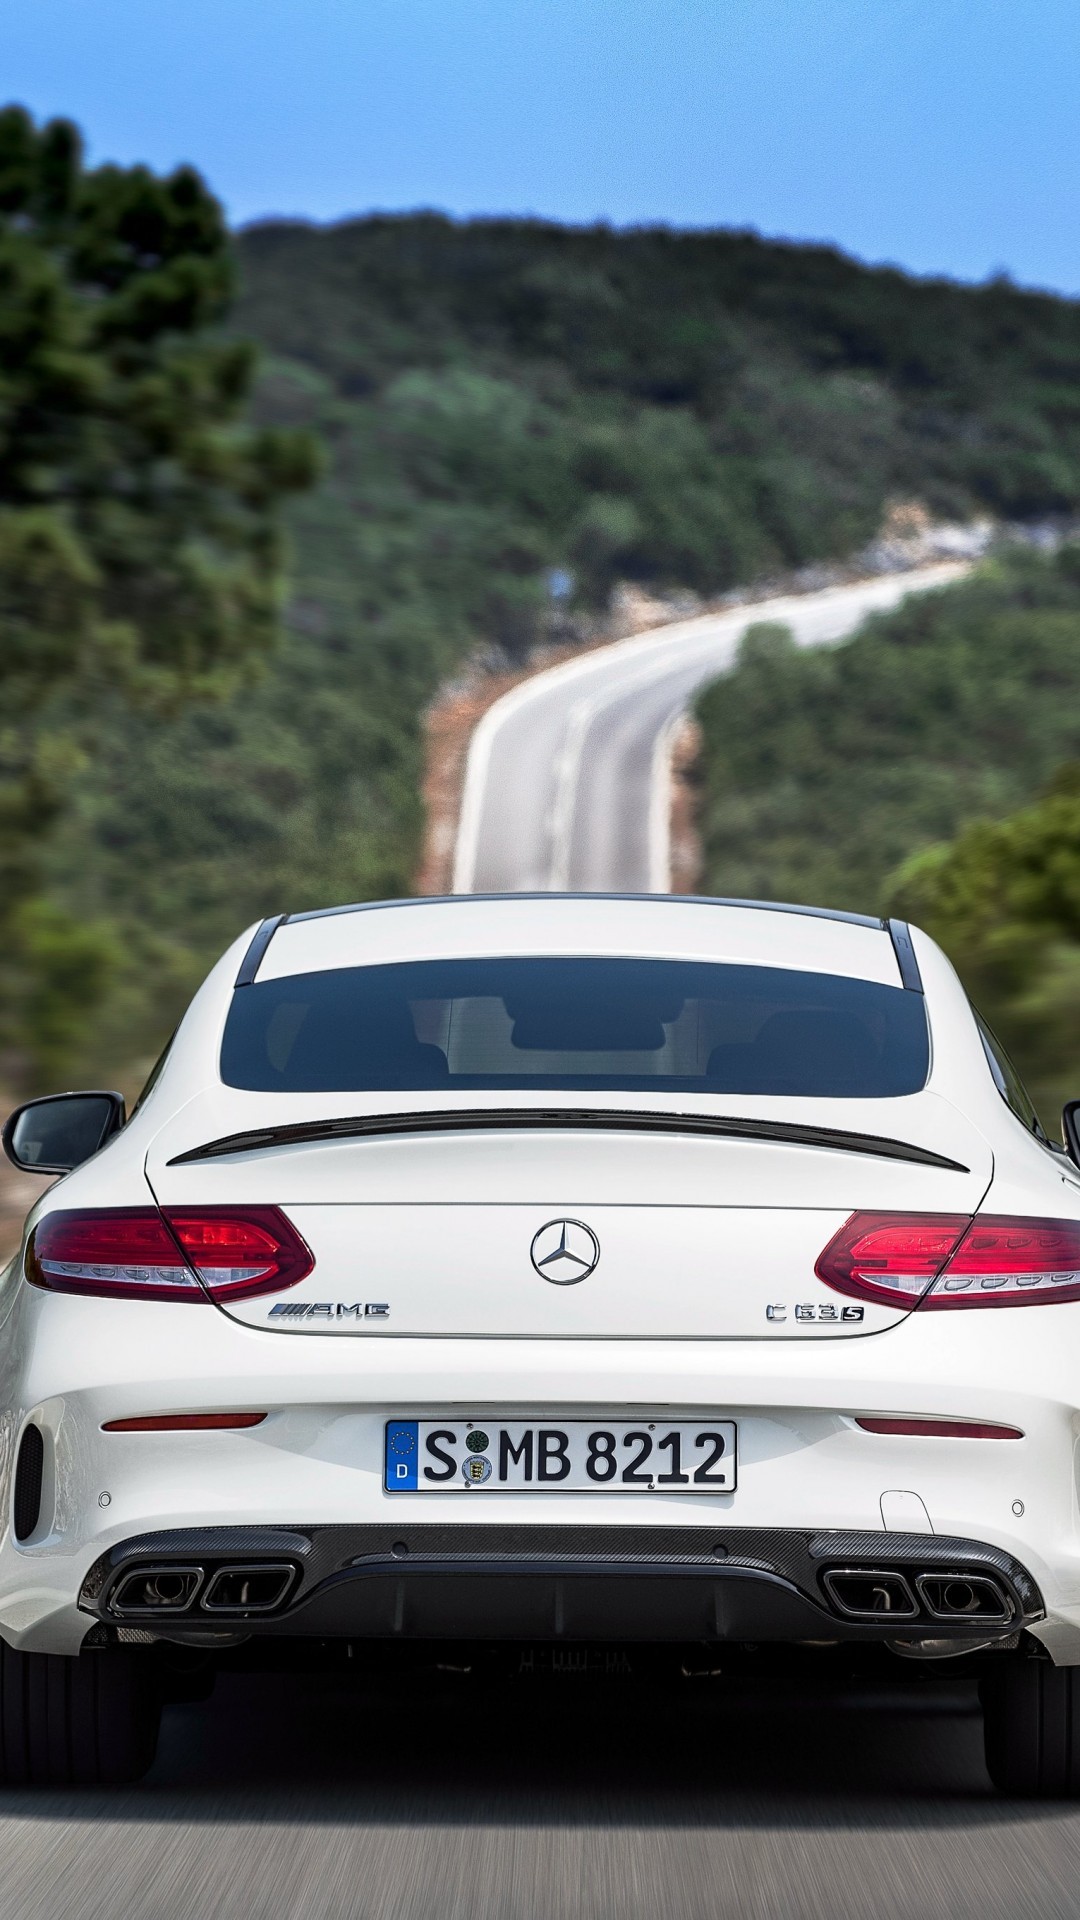 Mercedes Amg C63 S Coupe Back View White Luxury S Class Coupe Price South Africa 750x1334 Wallpaper Teahub Io